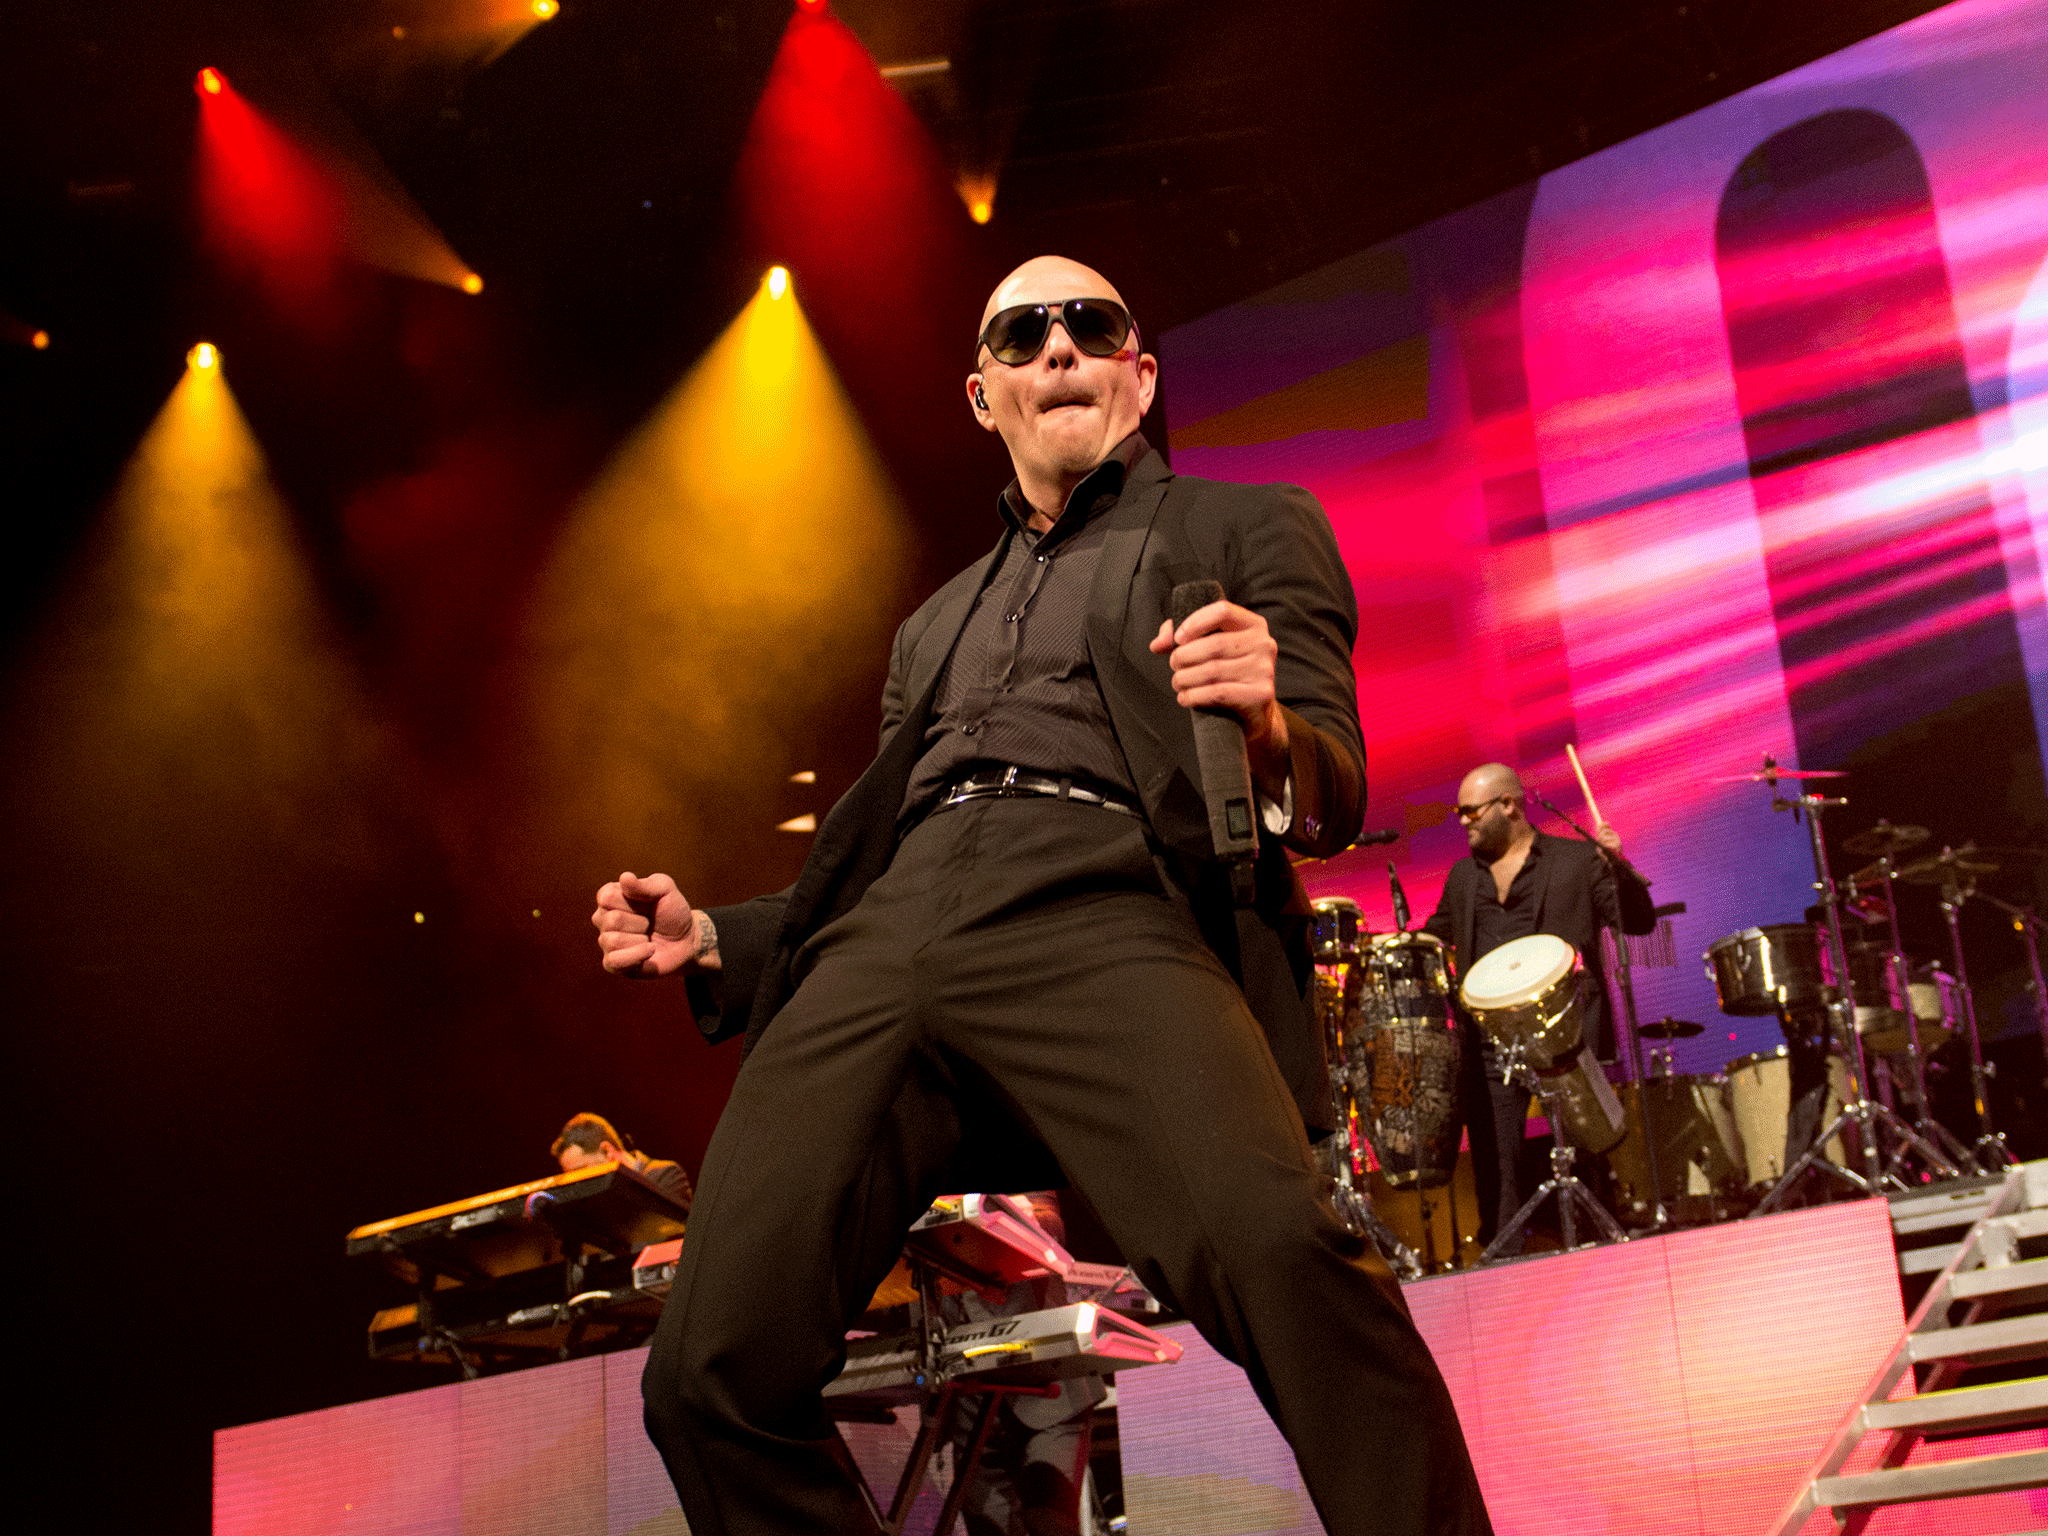 Rapper Pitbull is to be honoured with a star on the Hollywood Walk of Fame in 2015